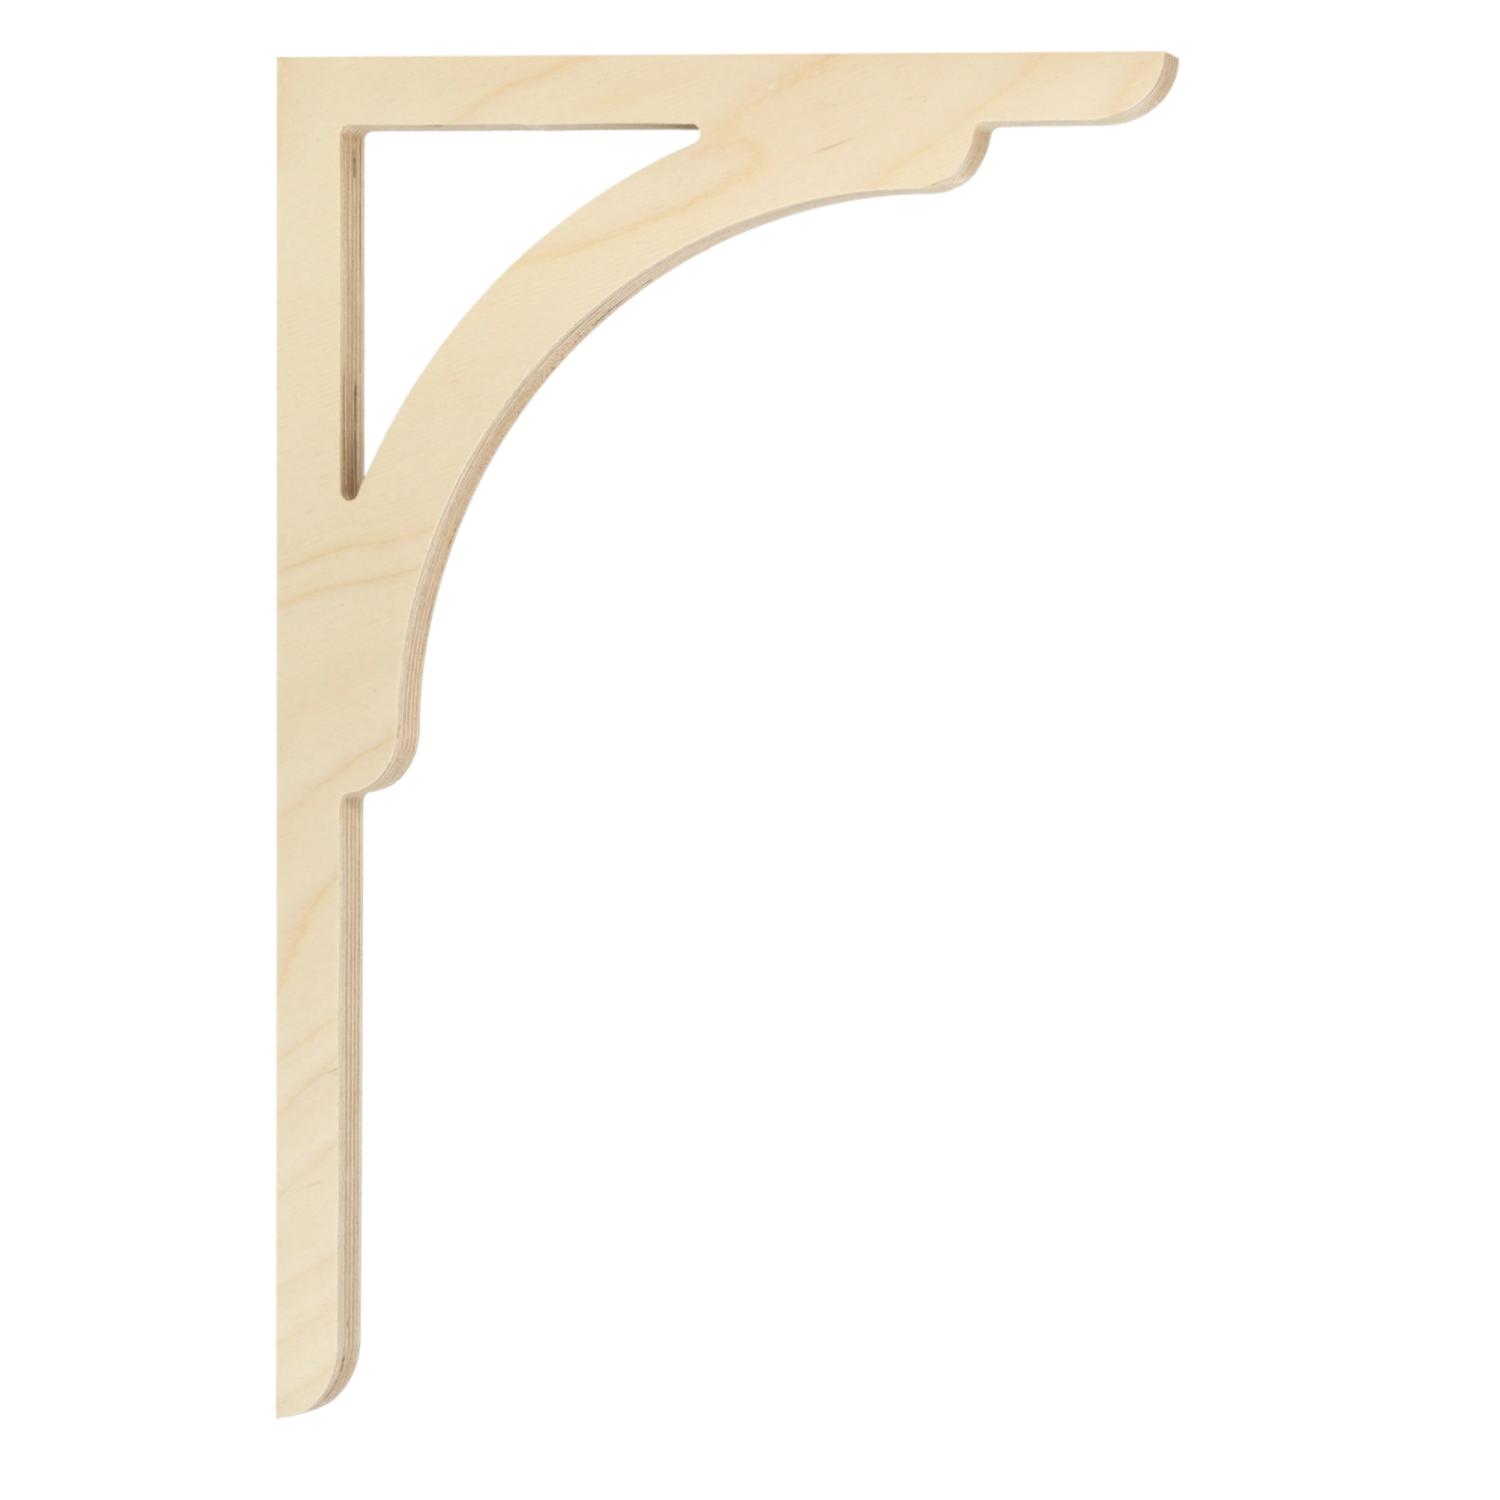 Bracket 005 - A classic wooden corbel & bracket with ornaments for porch, portico and veranda.